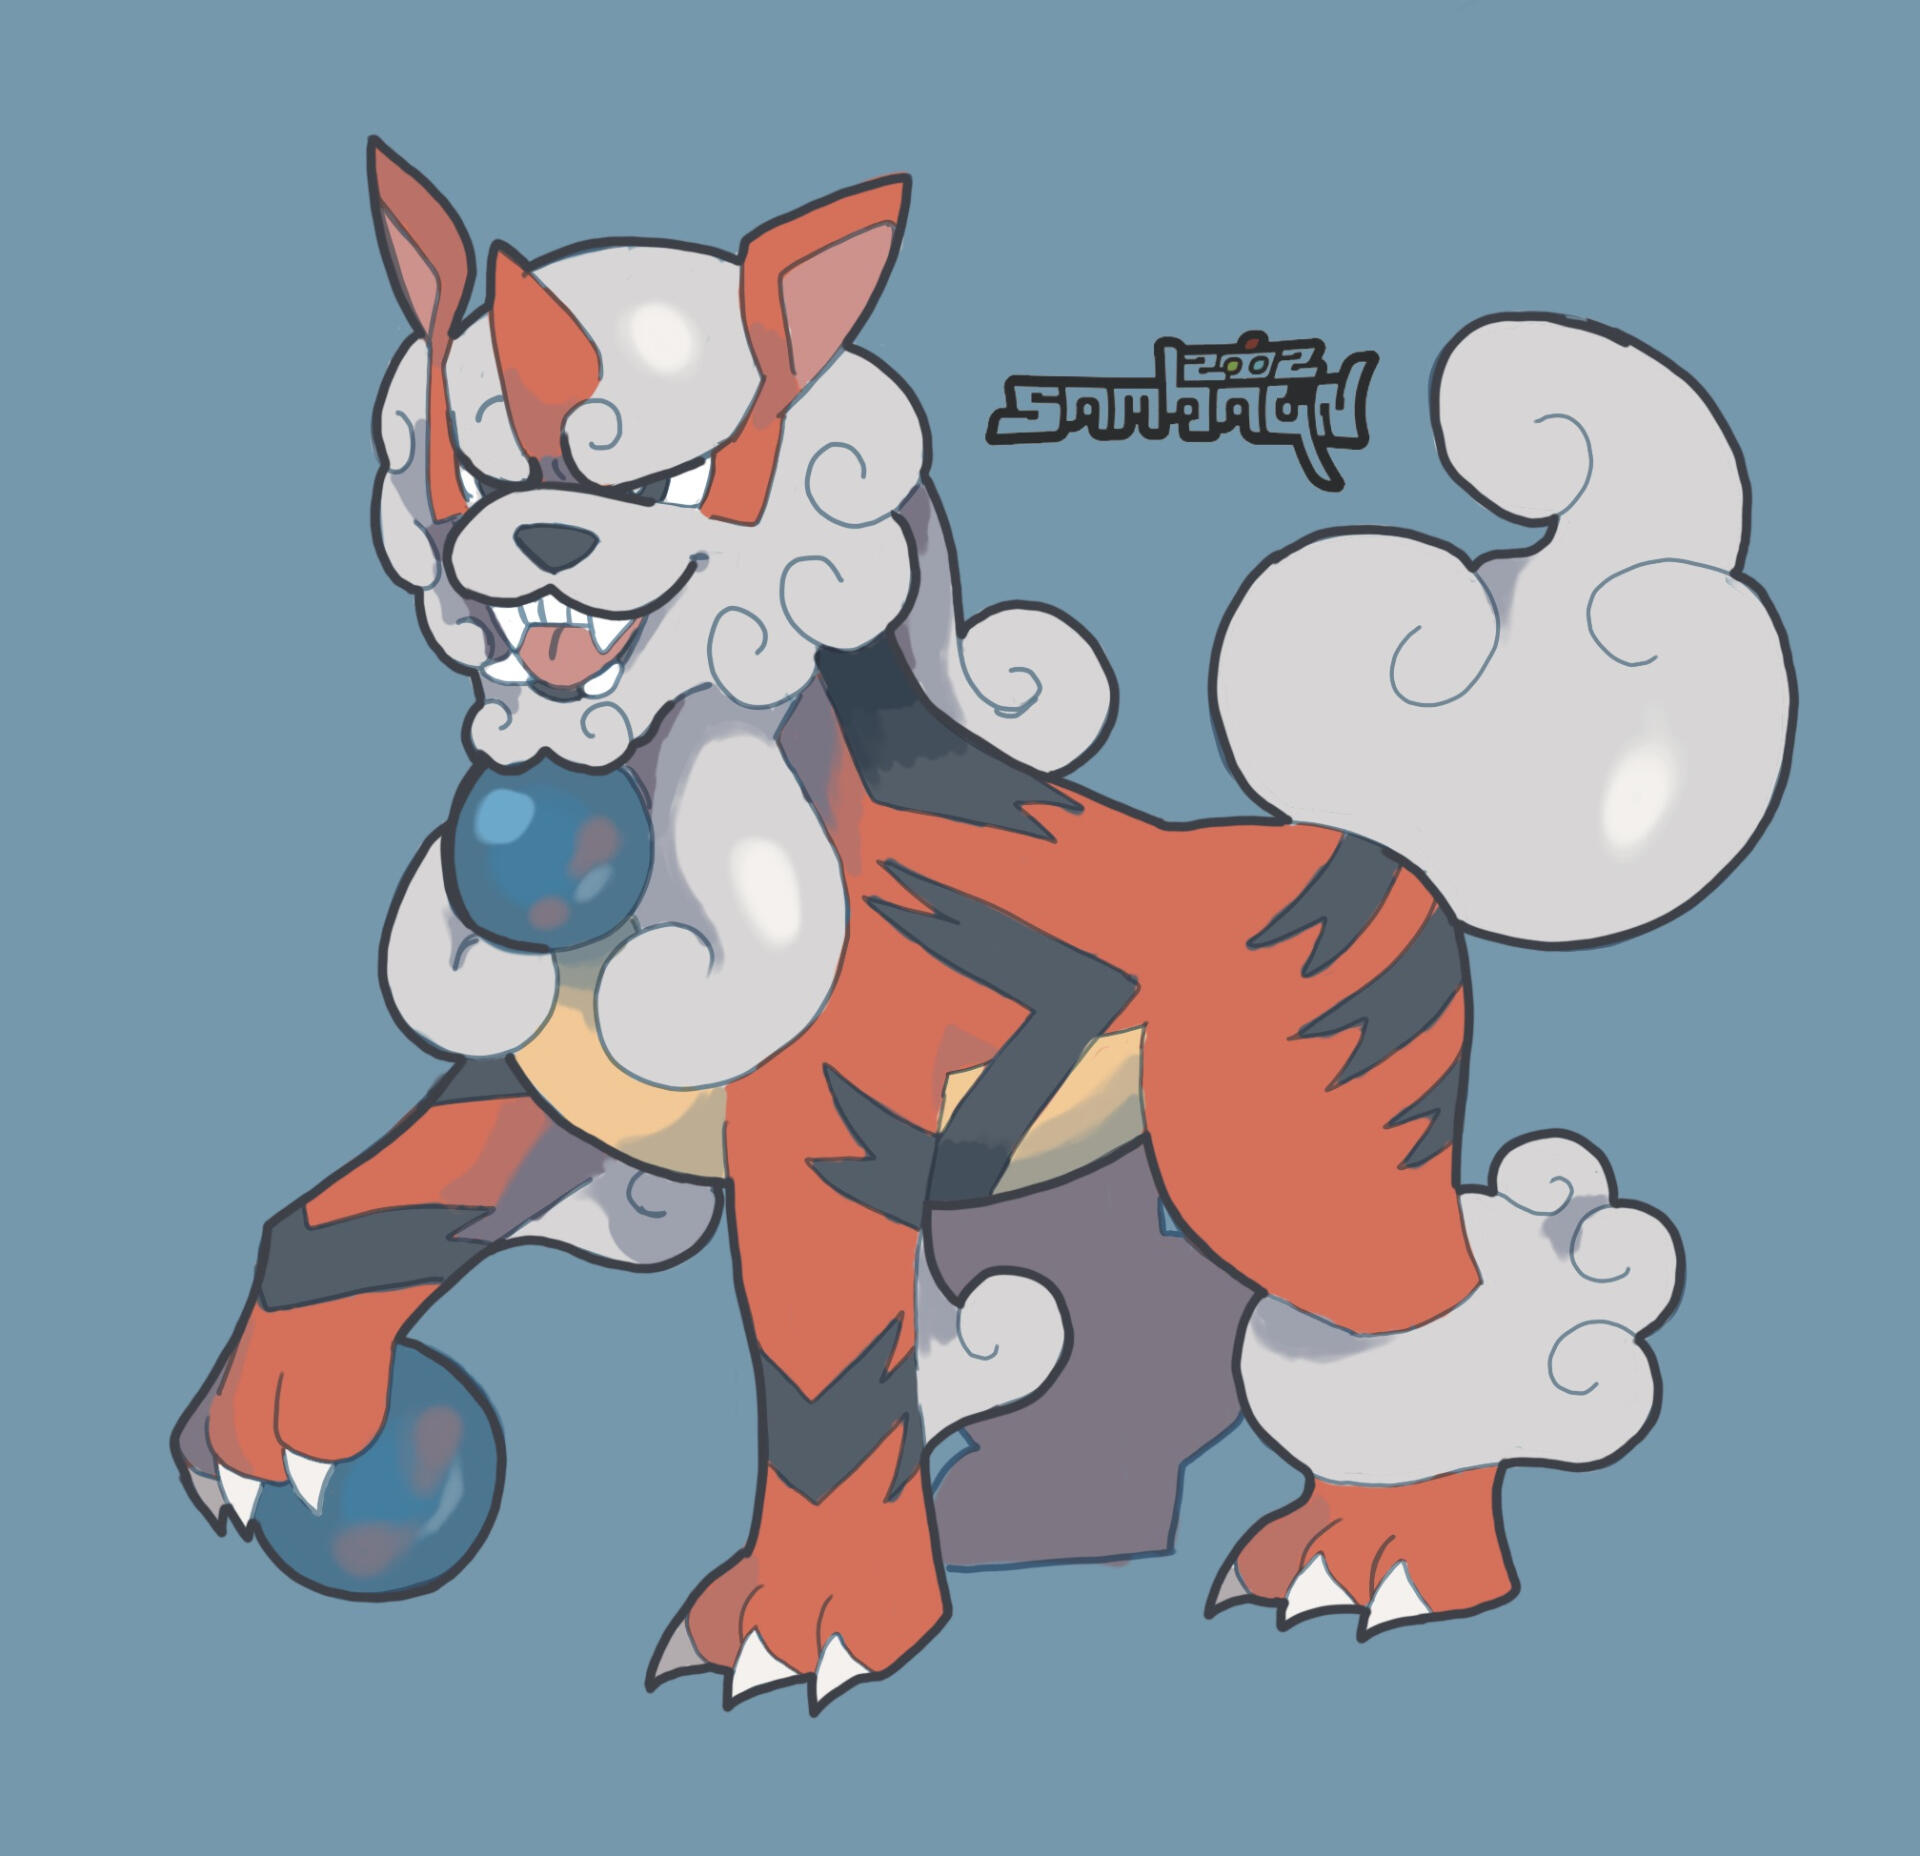 This was my speculation for hisuian arcanine once hisuian growlithe was shown. I followed the stone lion theme and applied the existing elements of the design. Done in 2021.